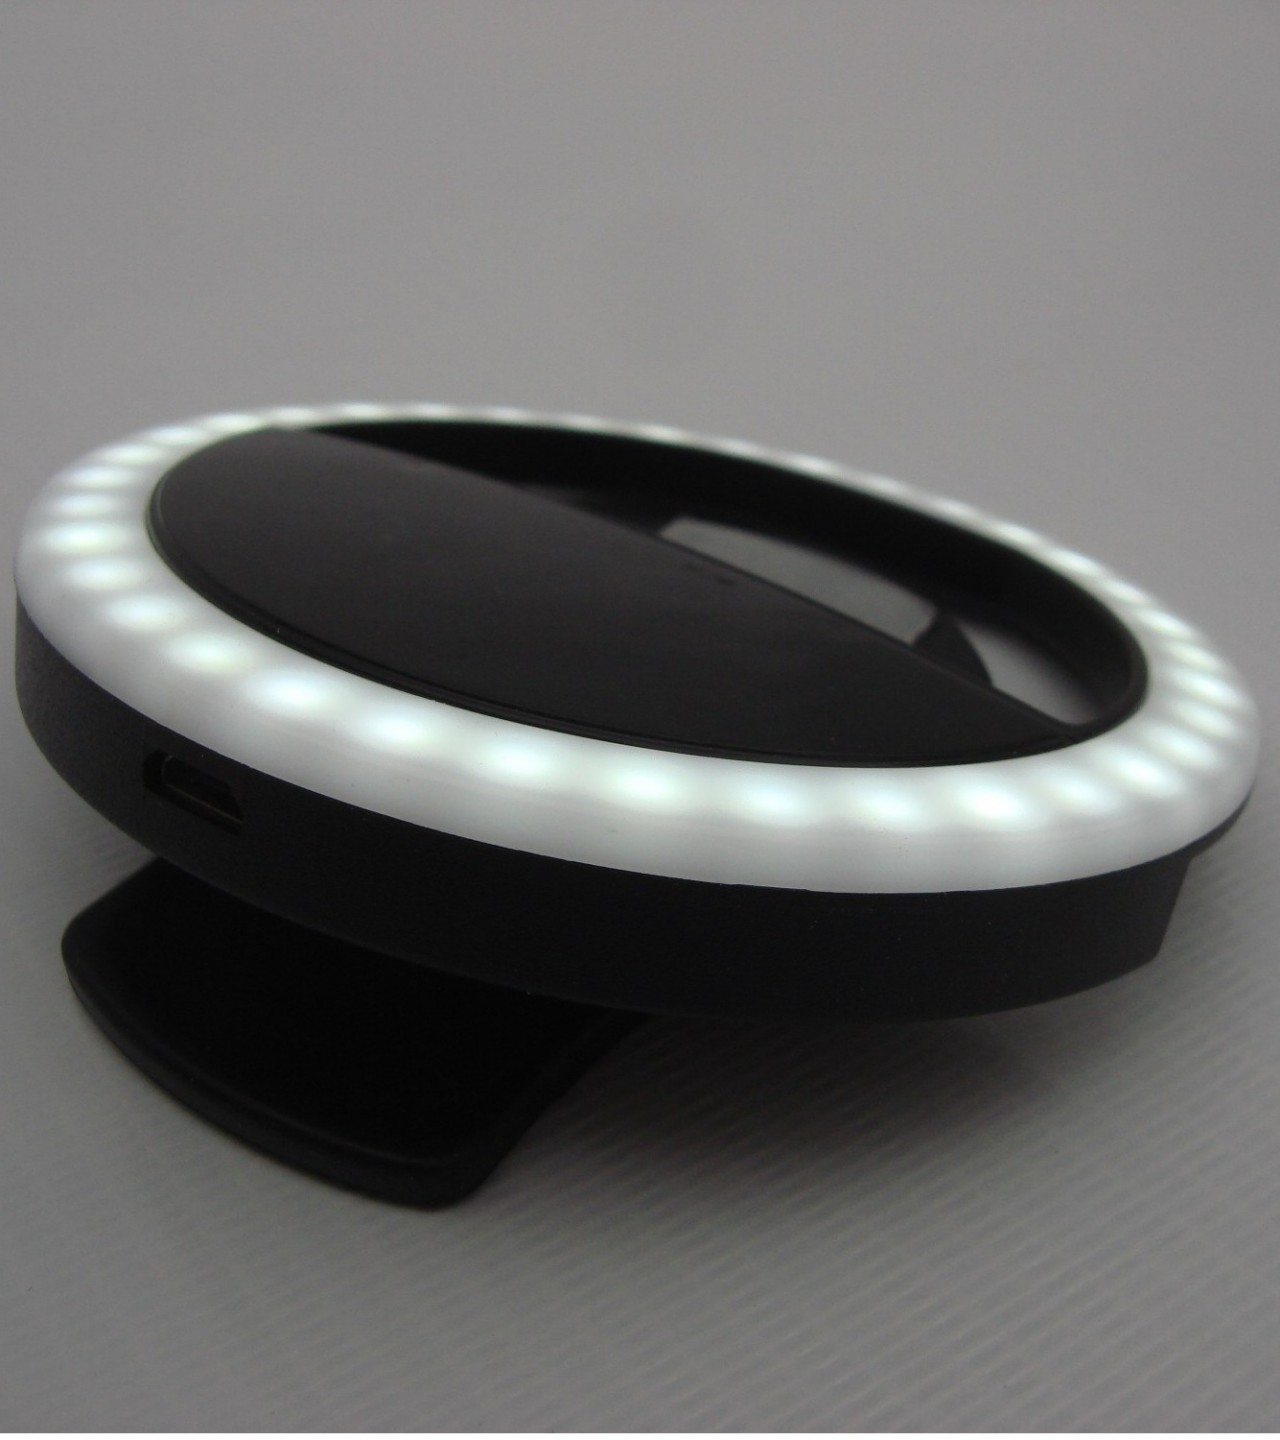 36 LED rechargeable selfie ring light (Original pictures shown)